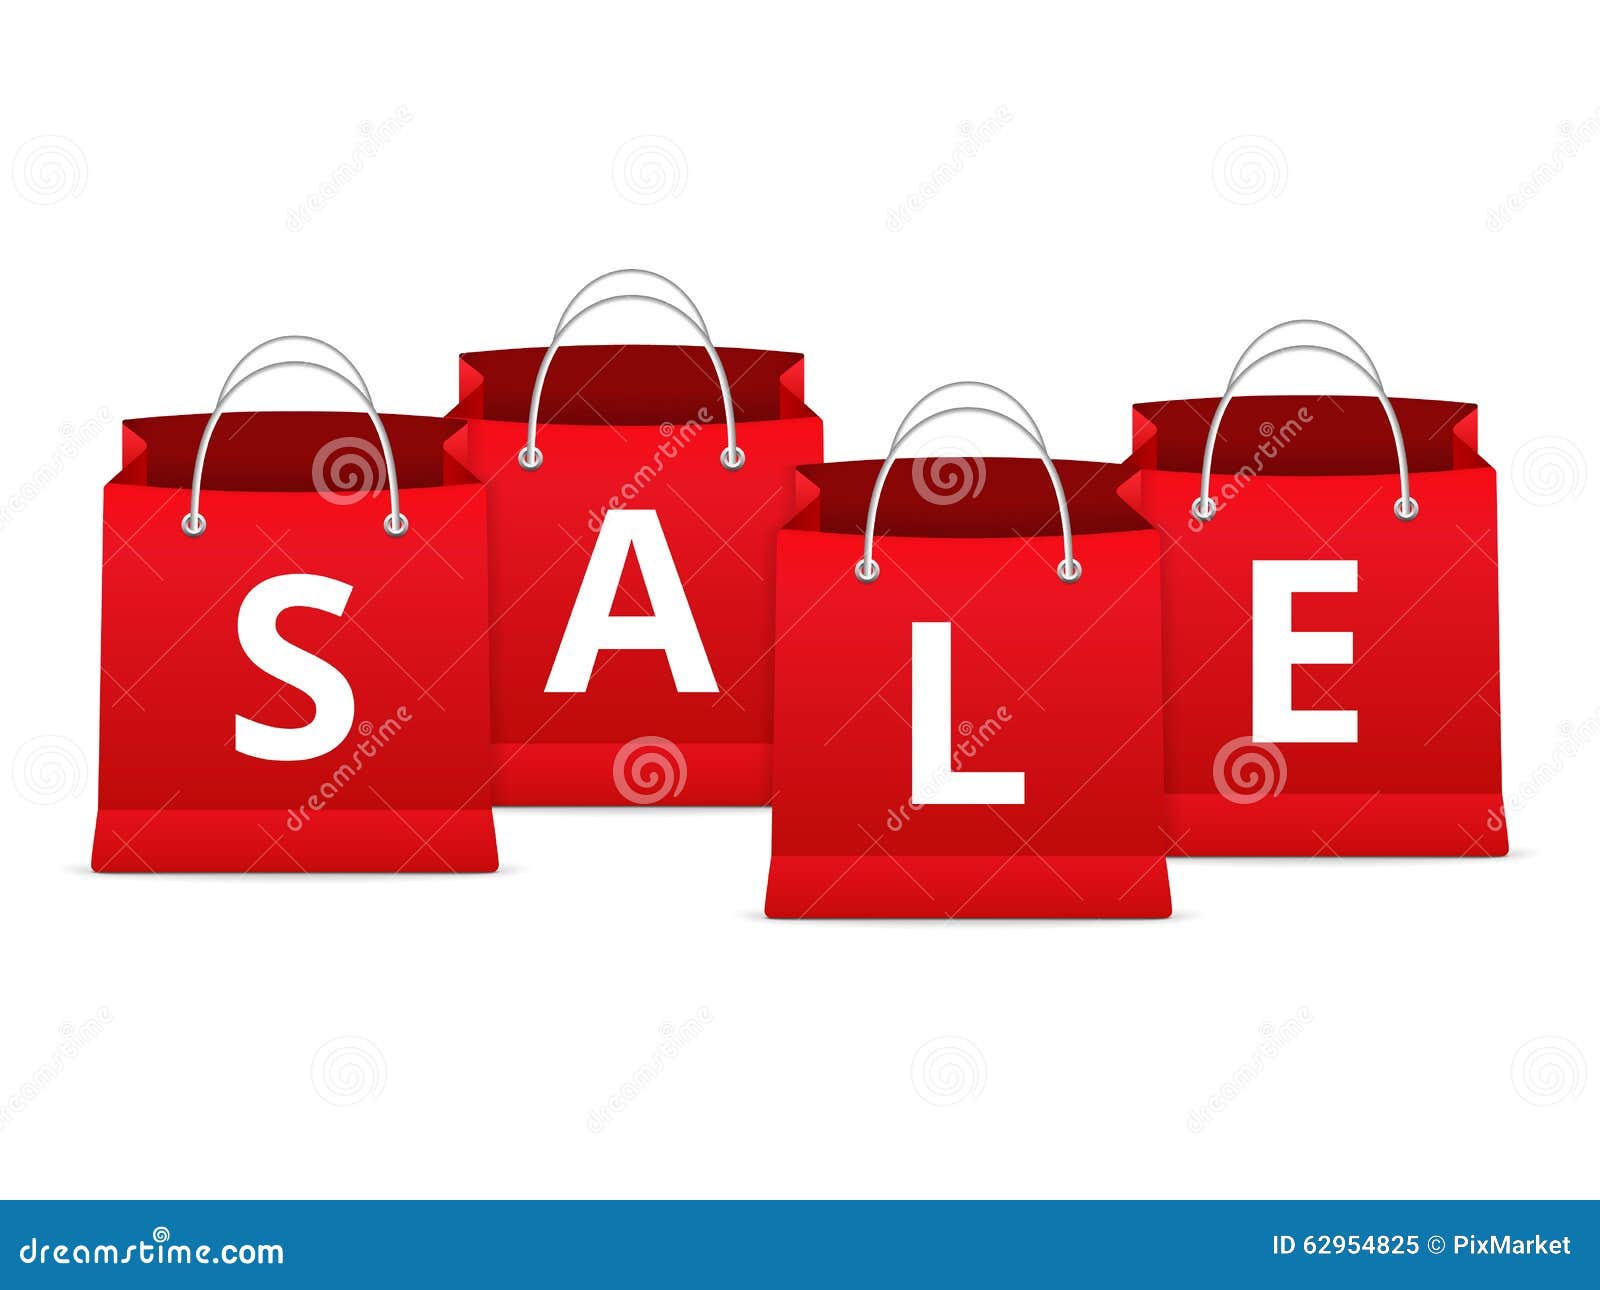 Sale on Shopping Bags stock vector. Illustration of handle - 62954825